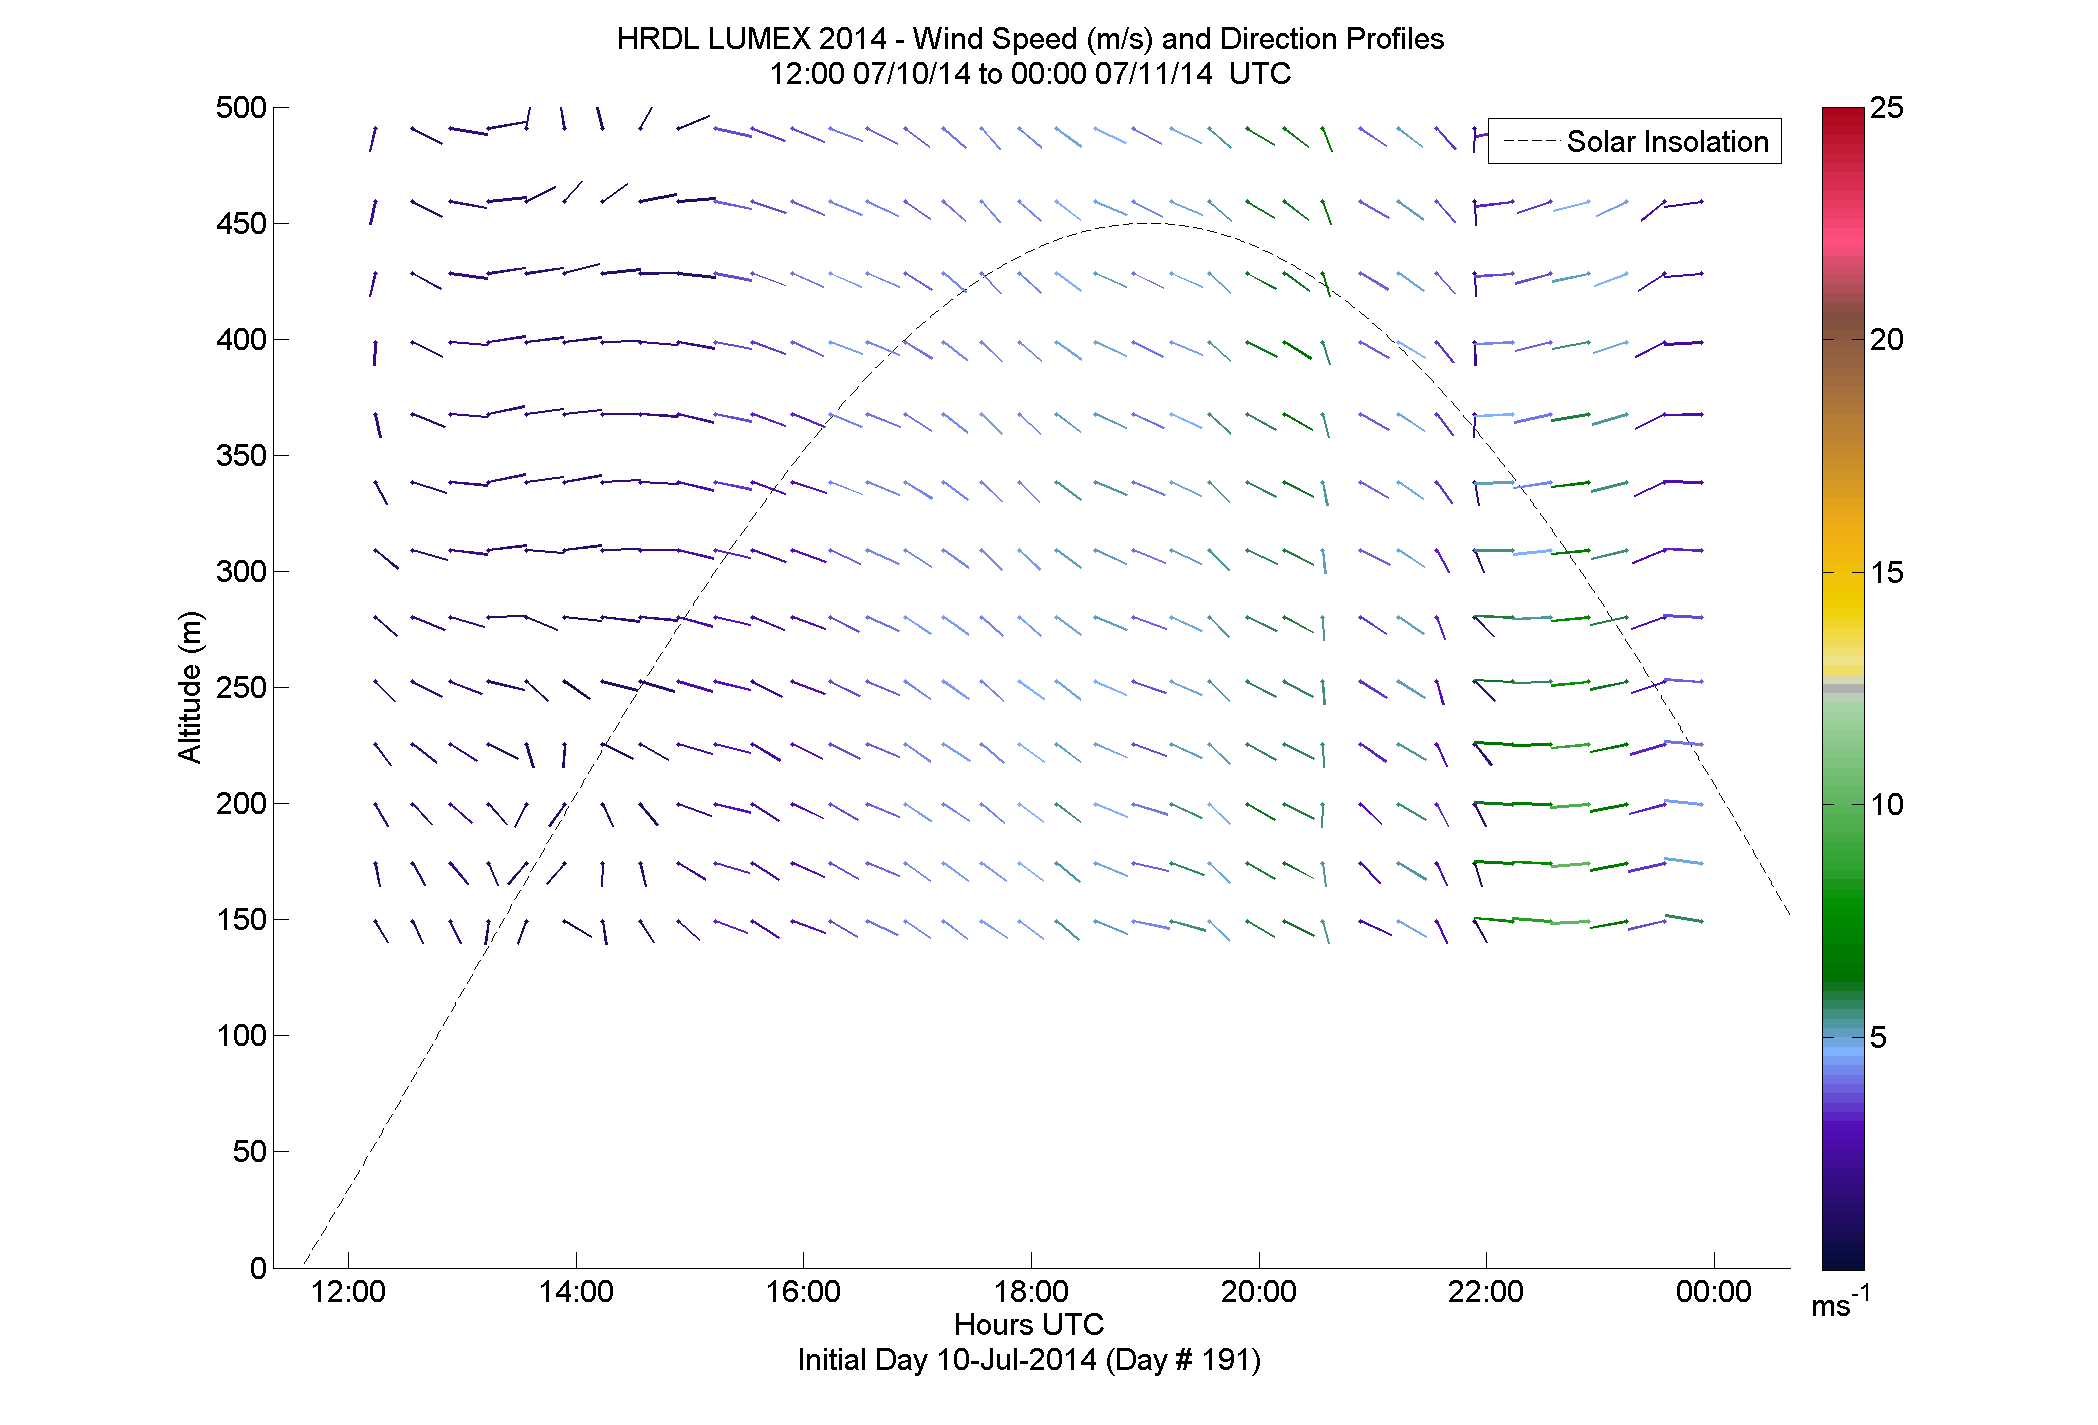 HRDL speed and direction profile - July 10 pm